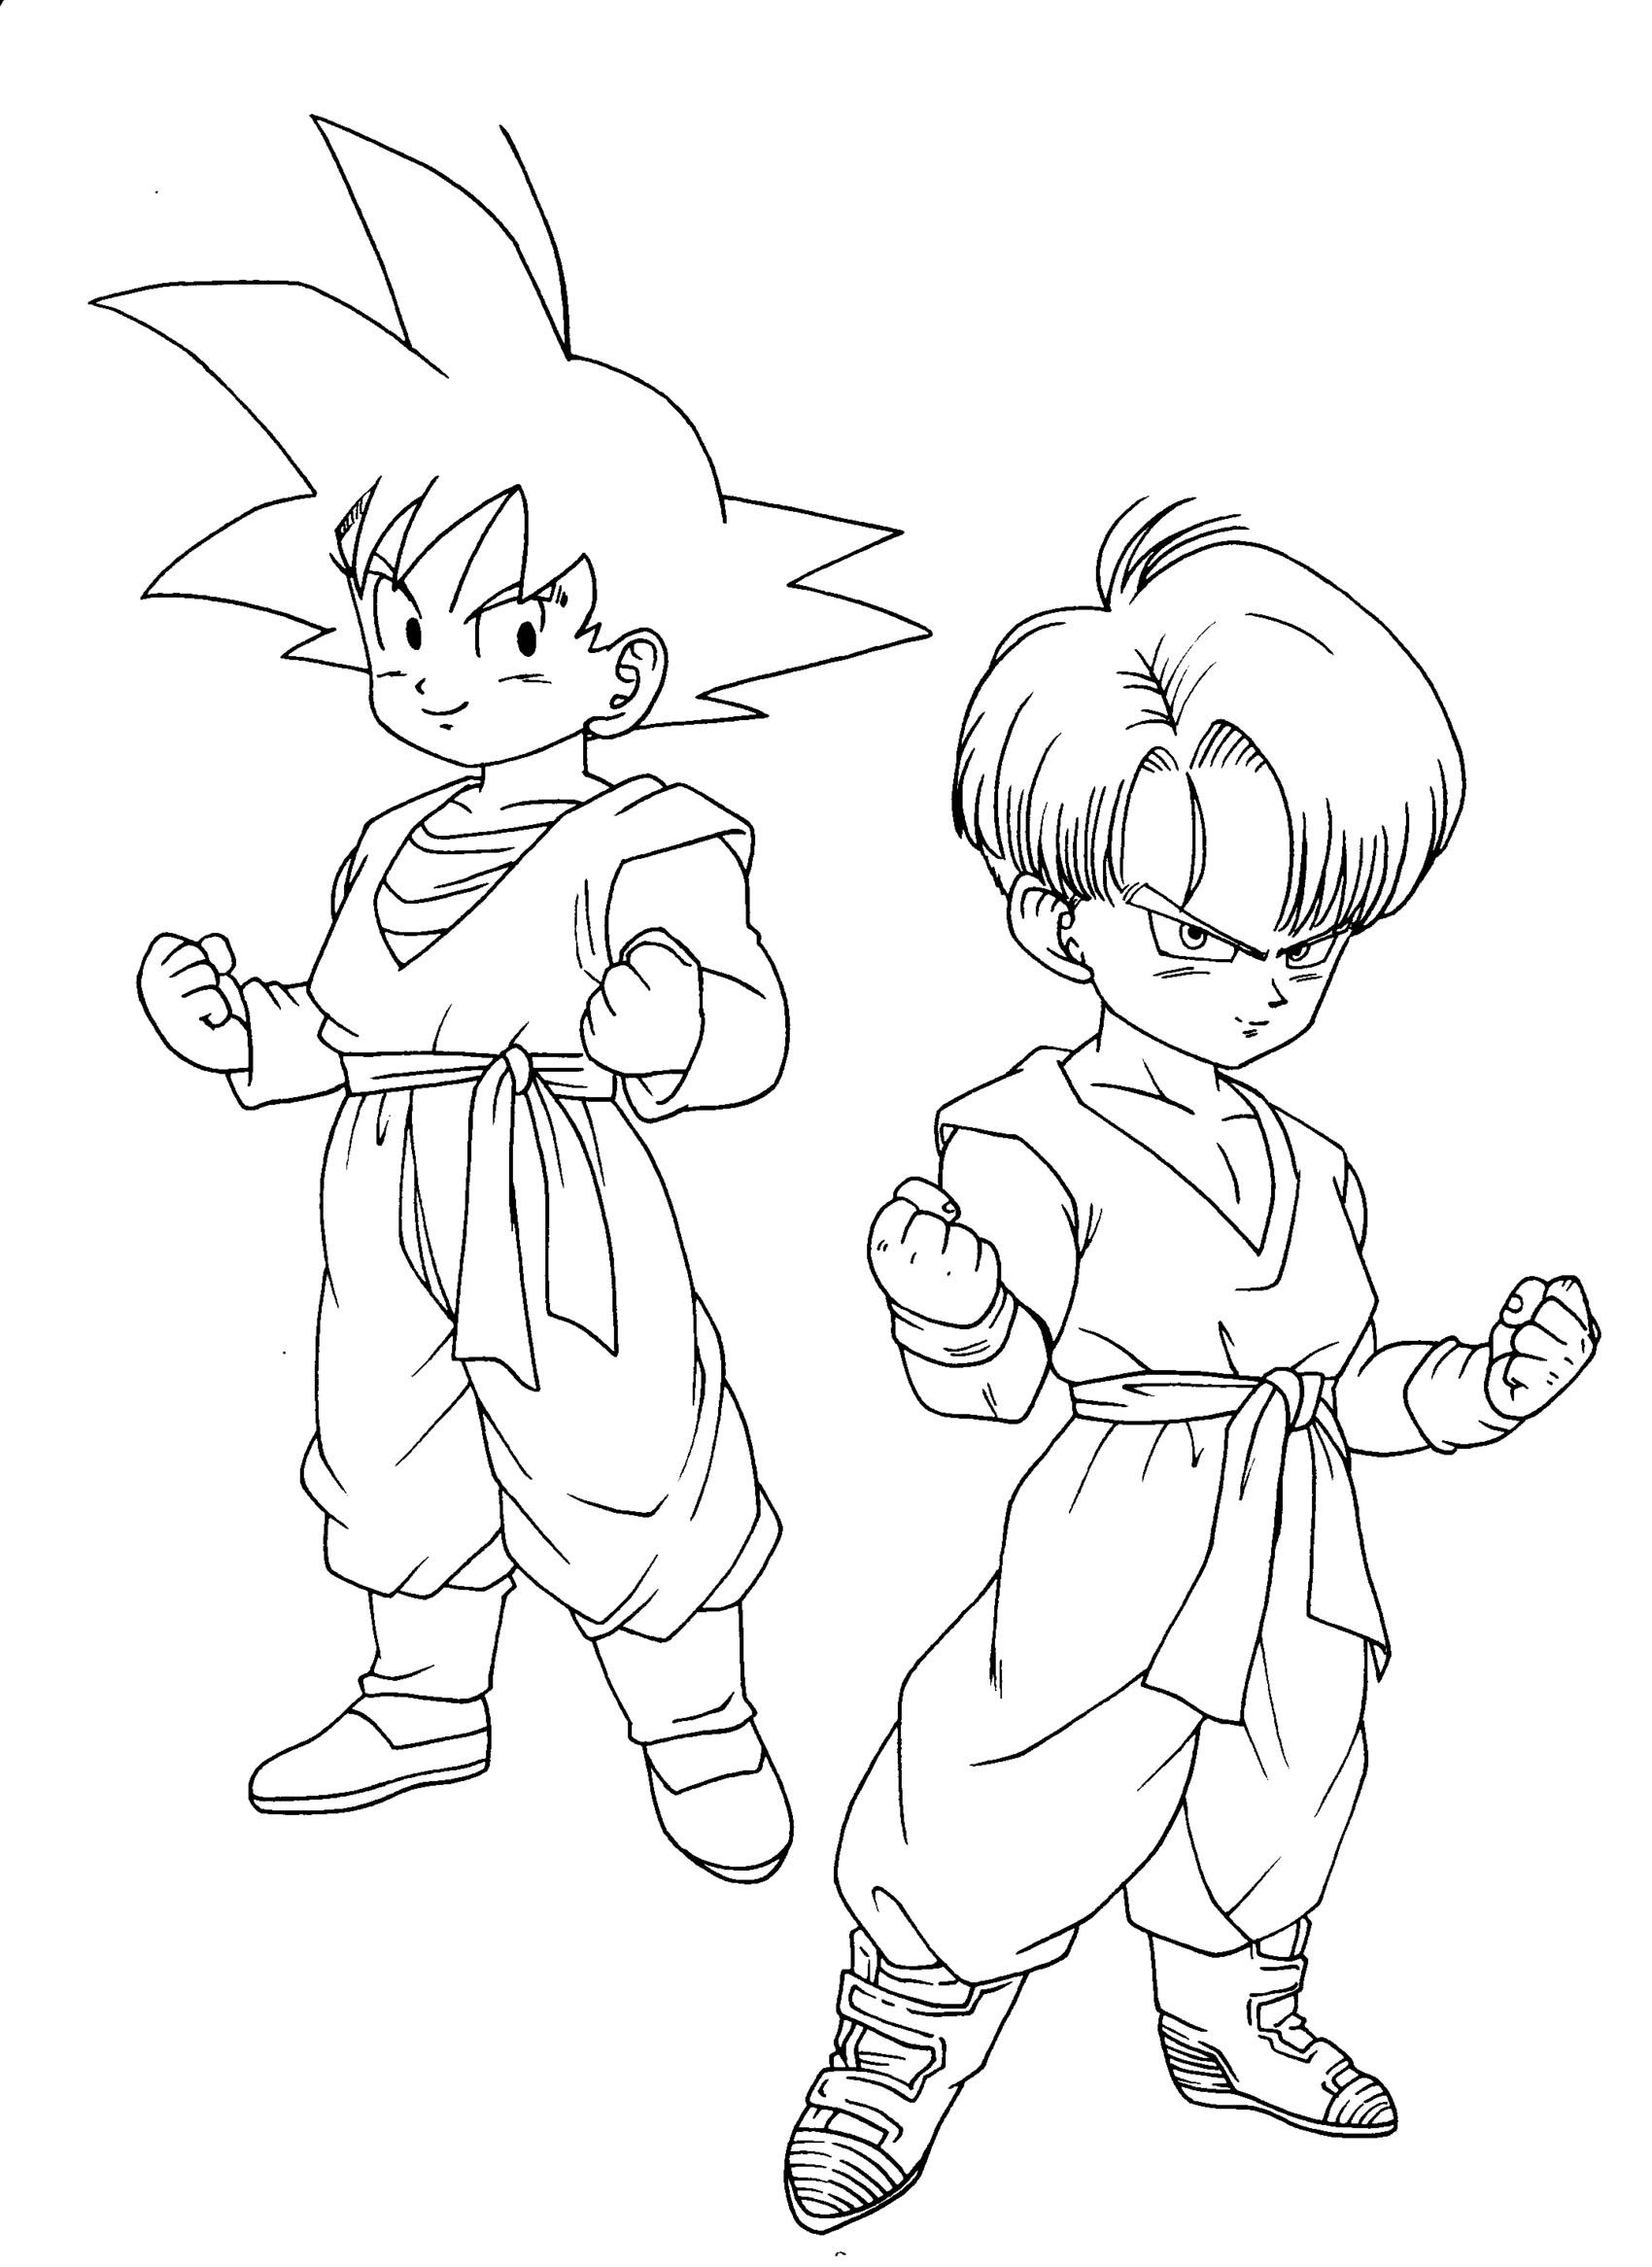 Free Dragon Ball Z coloring page to print and color, for kids : Songoten Trunks